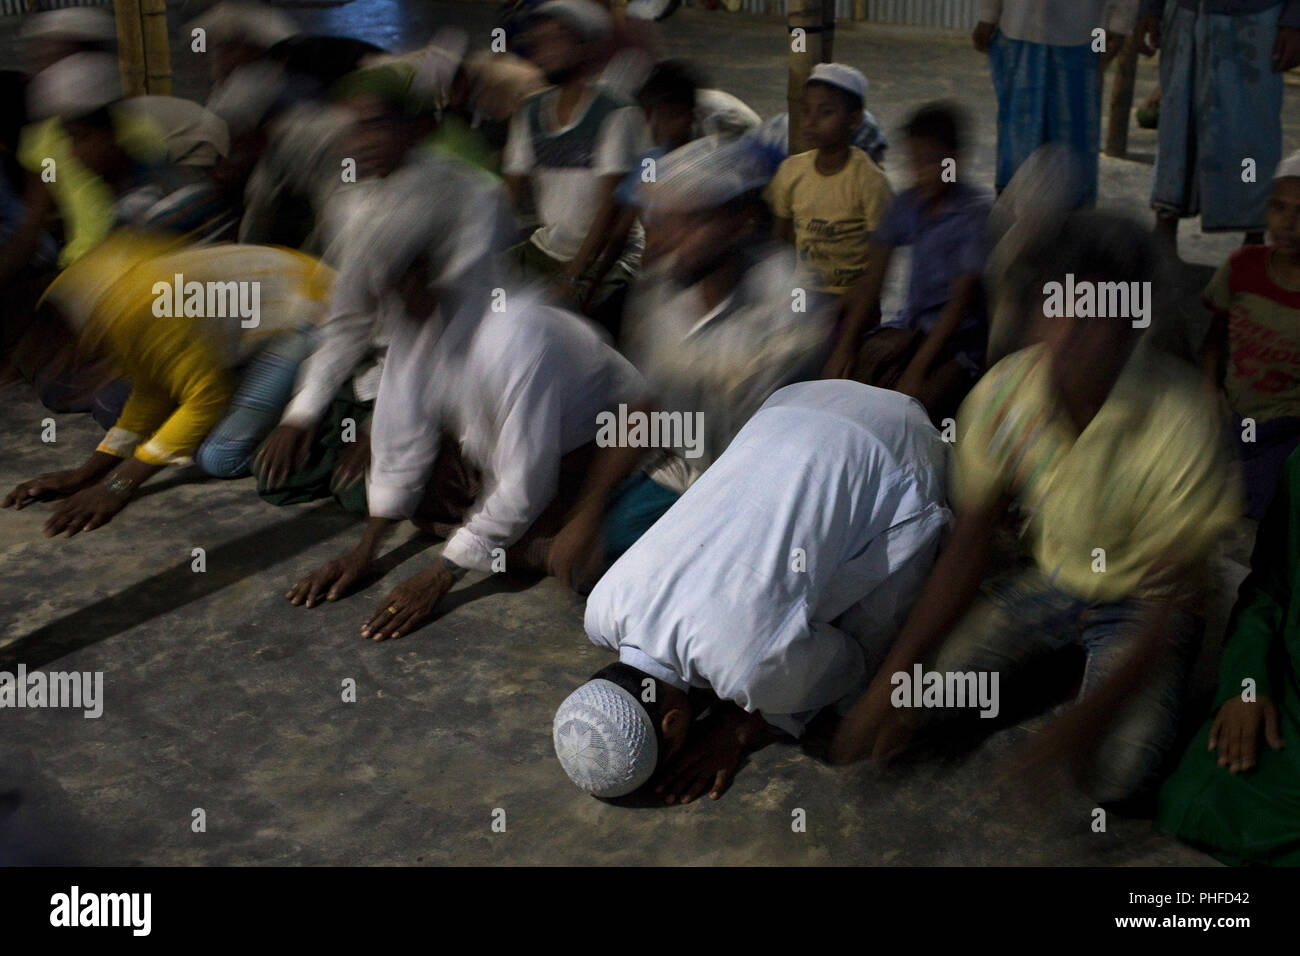 Men pray in a mosque in Balukhali, a part of the camp sheltering over 800,000 refugees, Cox's Bazar, Bangladesh, July 6, 2018 Stock Photo